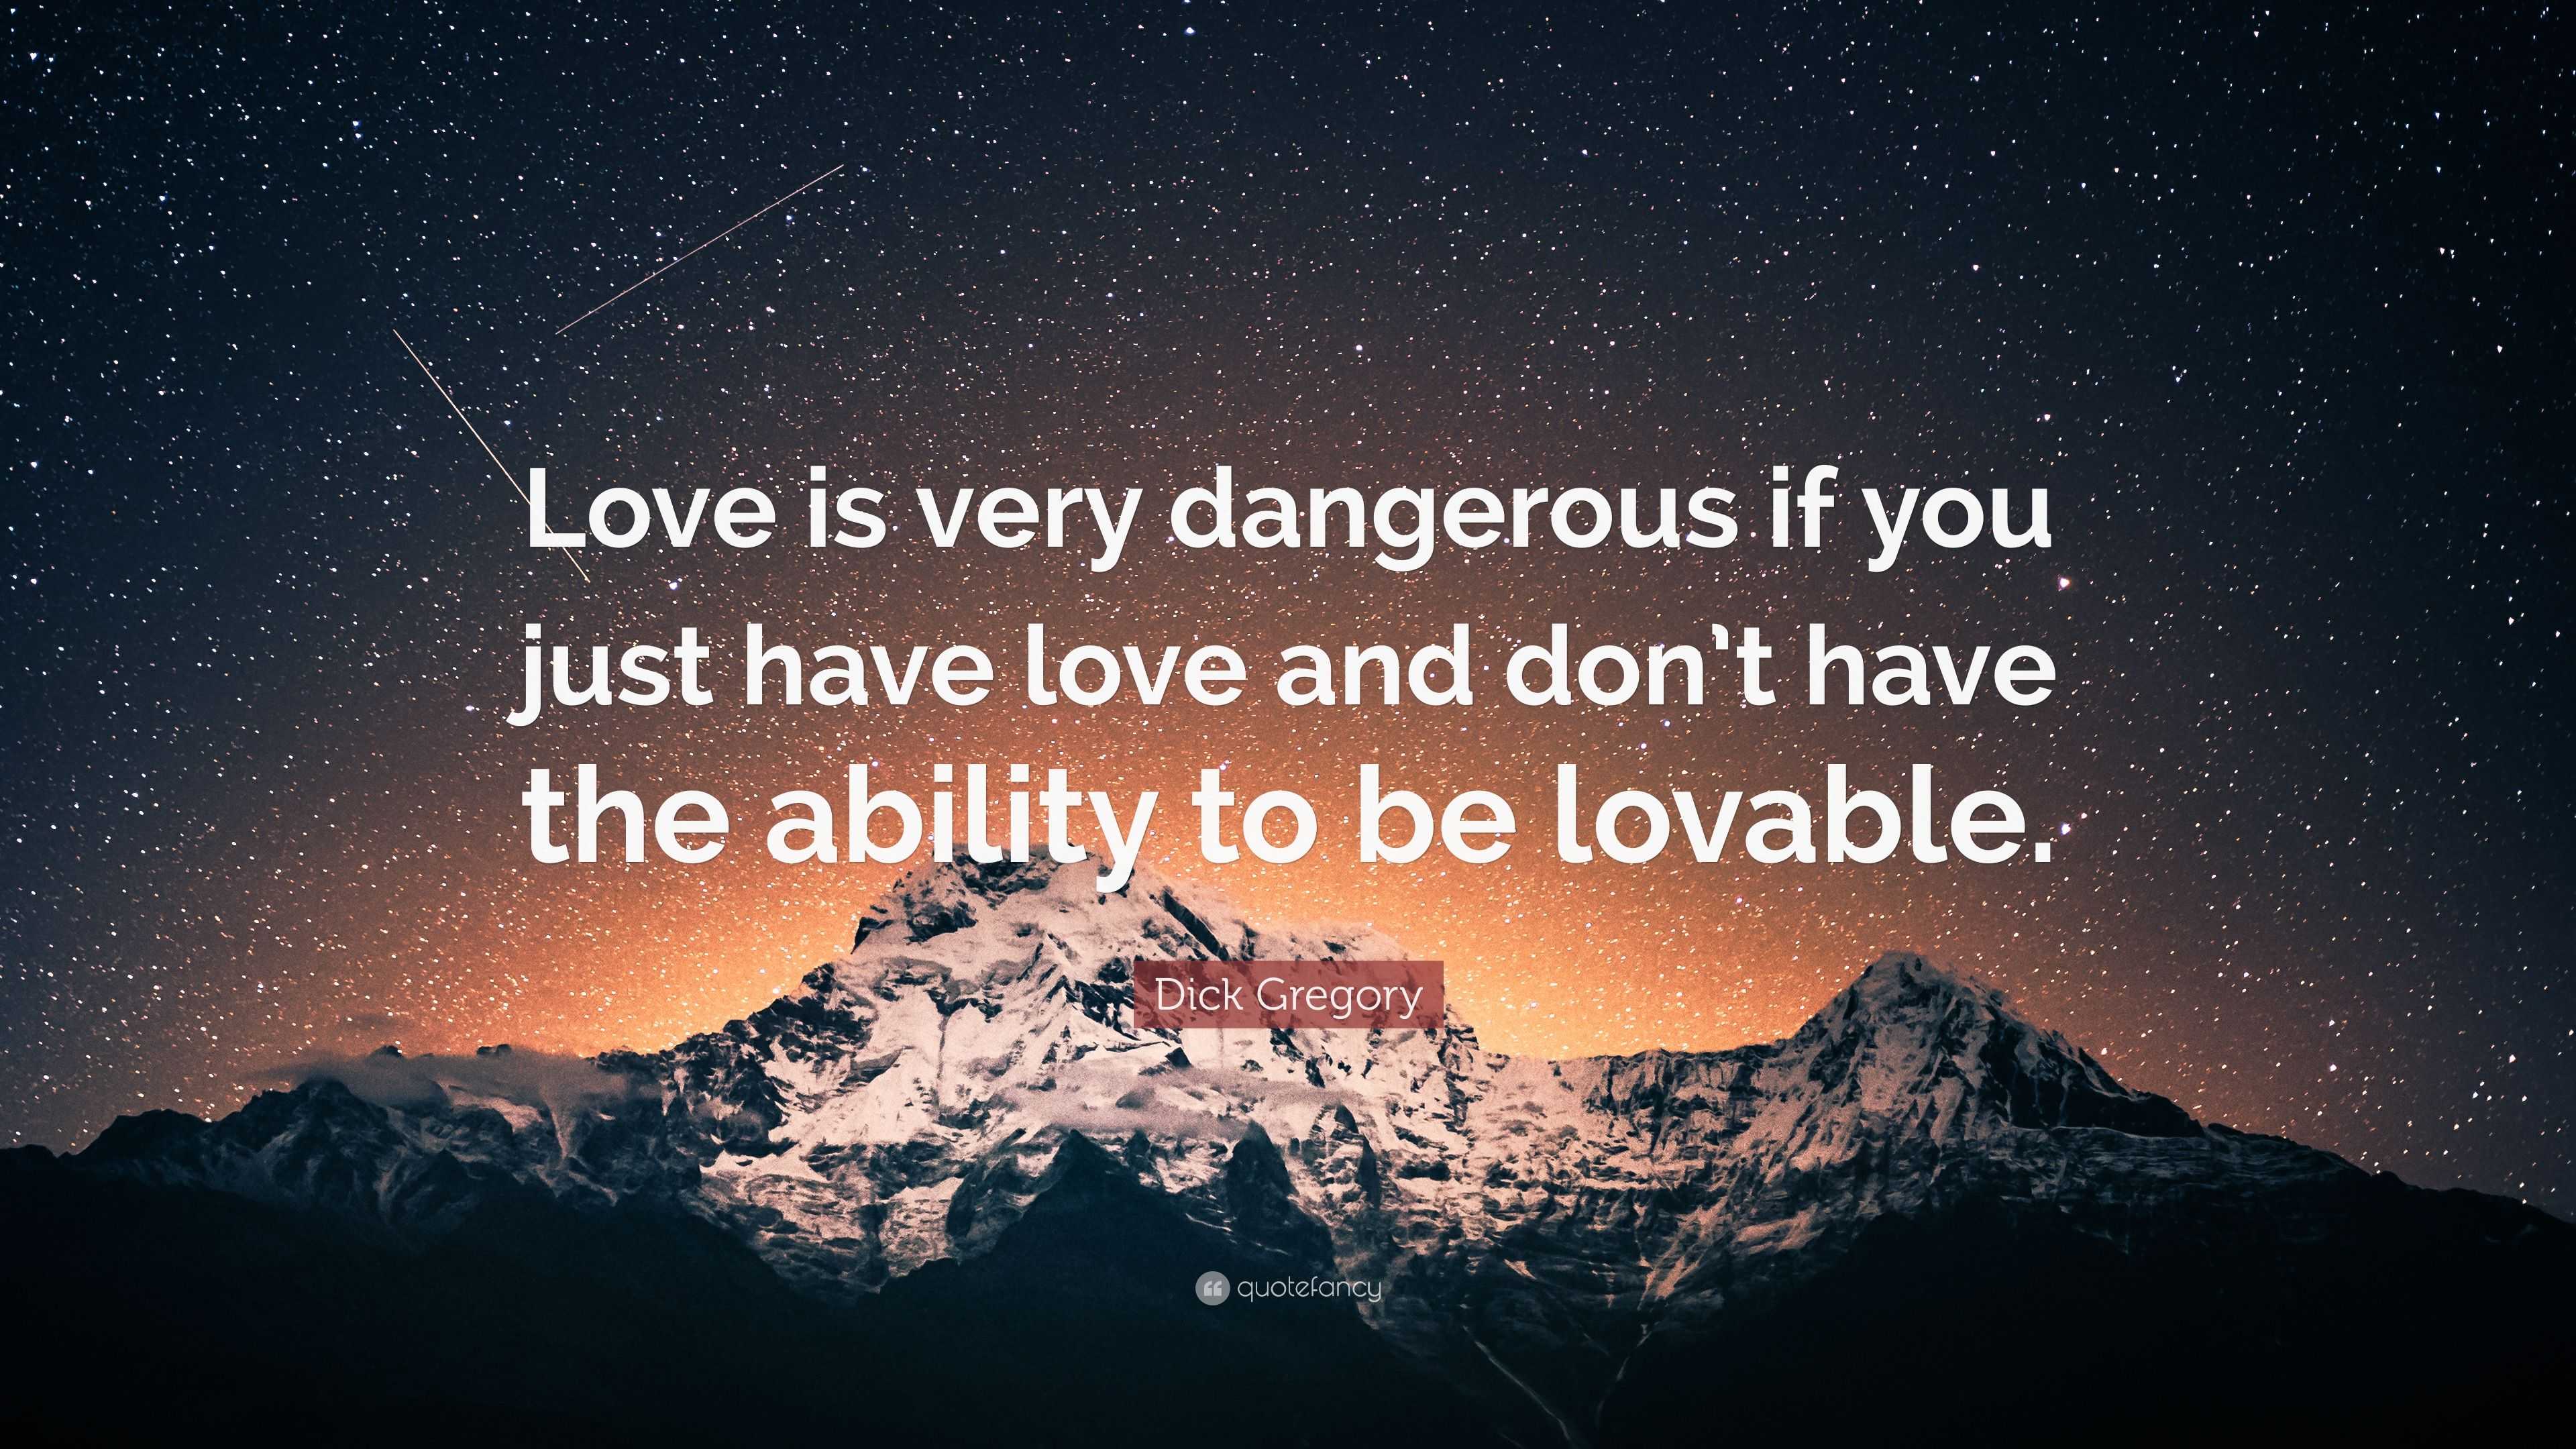 love is harmful quotes